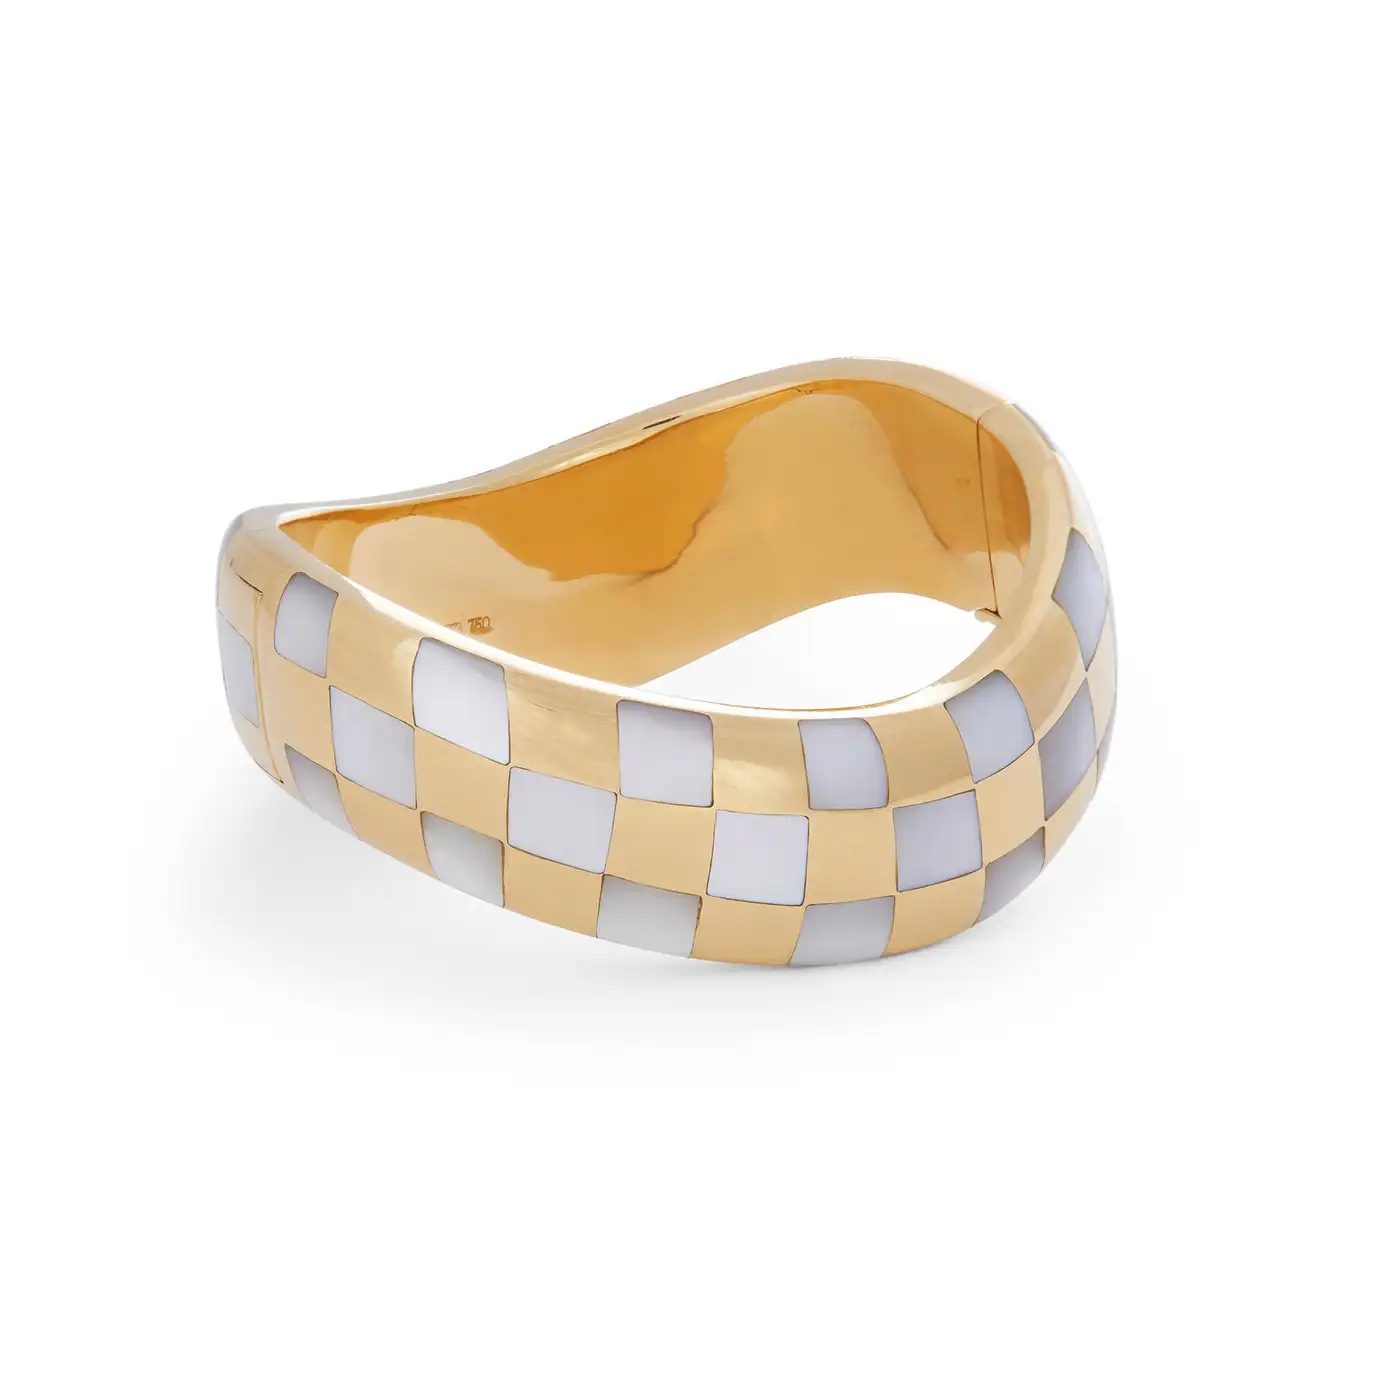 Angela-Cummings-Gold-and-Mother-or-Pearl-Bangle-10.webp